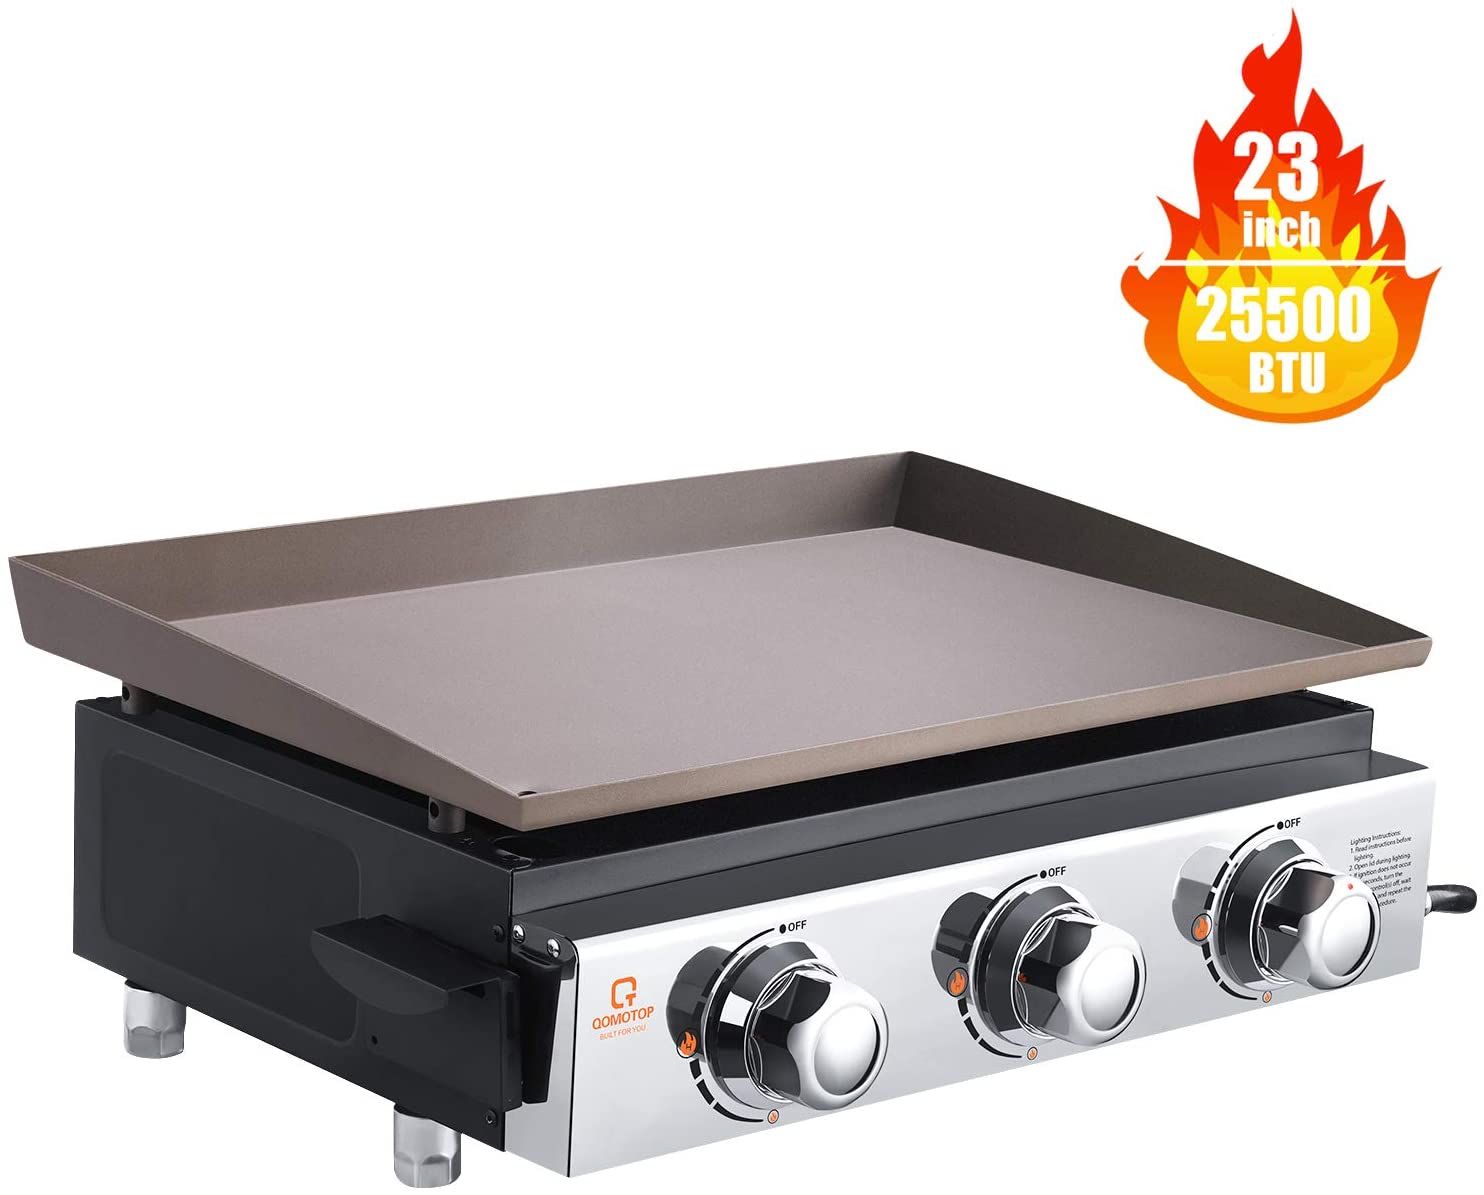 Tabletop Propane Gas Grill, 23 Inch Portable Outdoor Griddle, 3 Burners Griddle with 25500 BTU